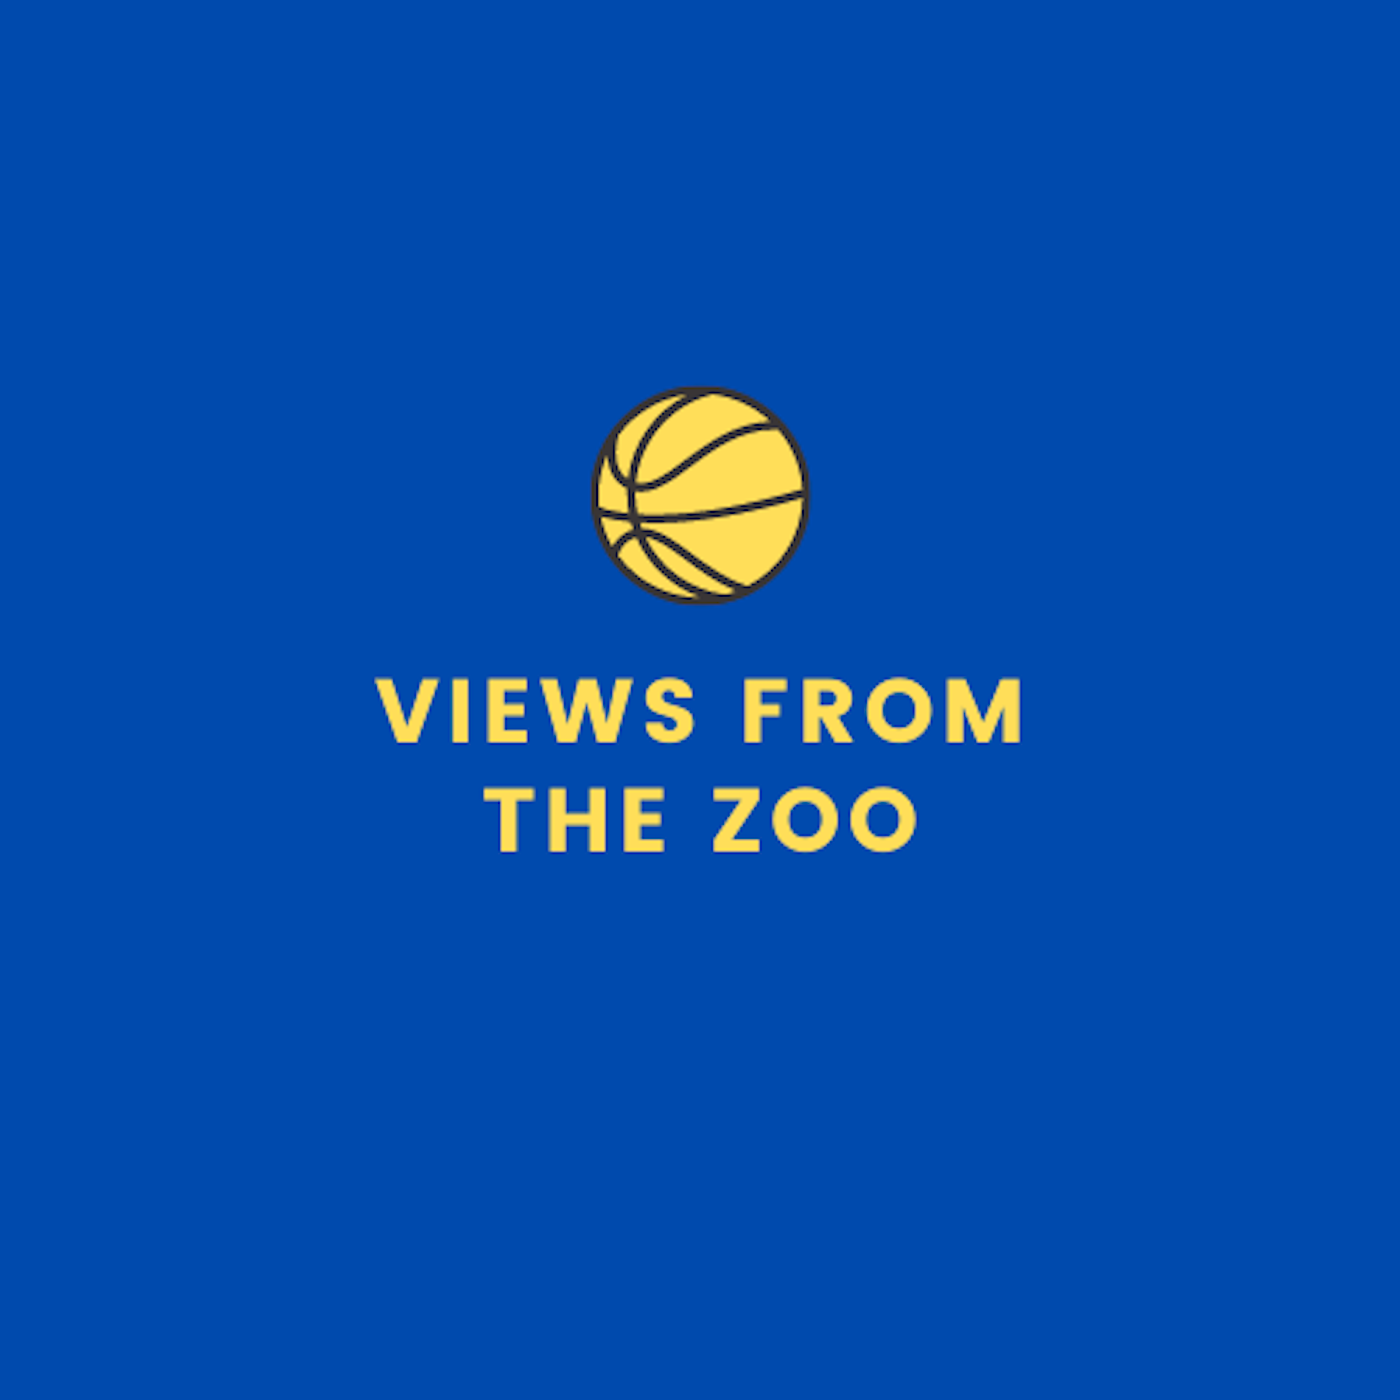 Views from the Zoo